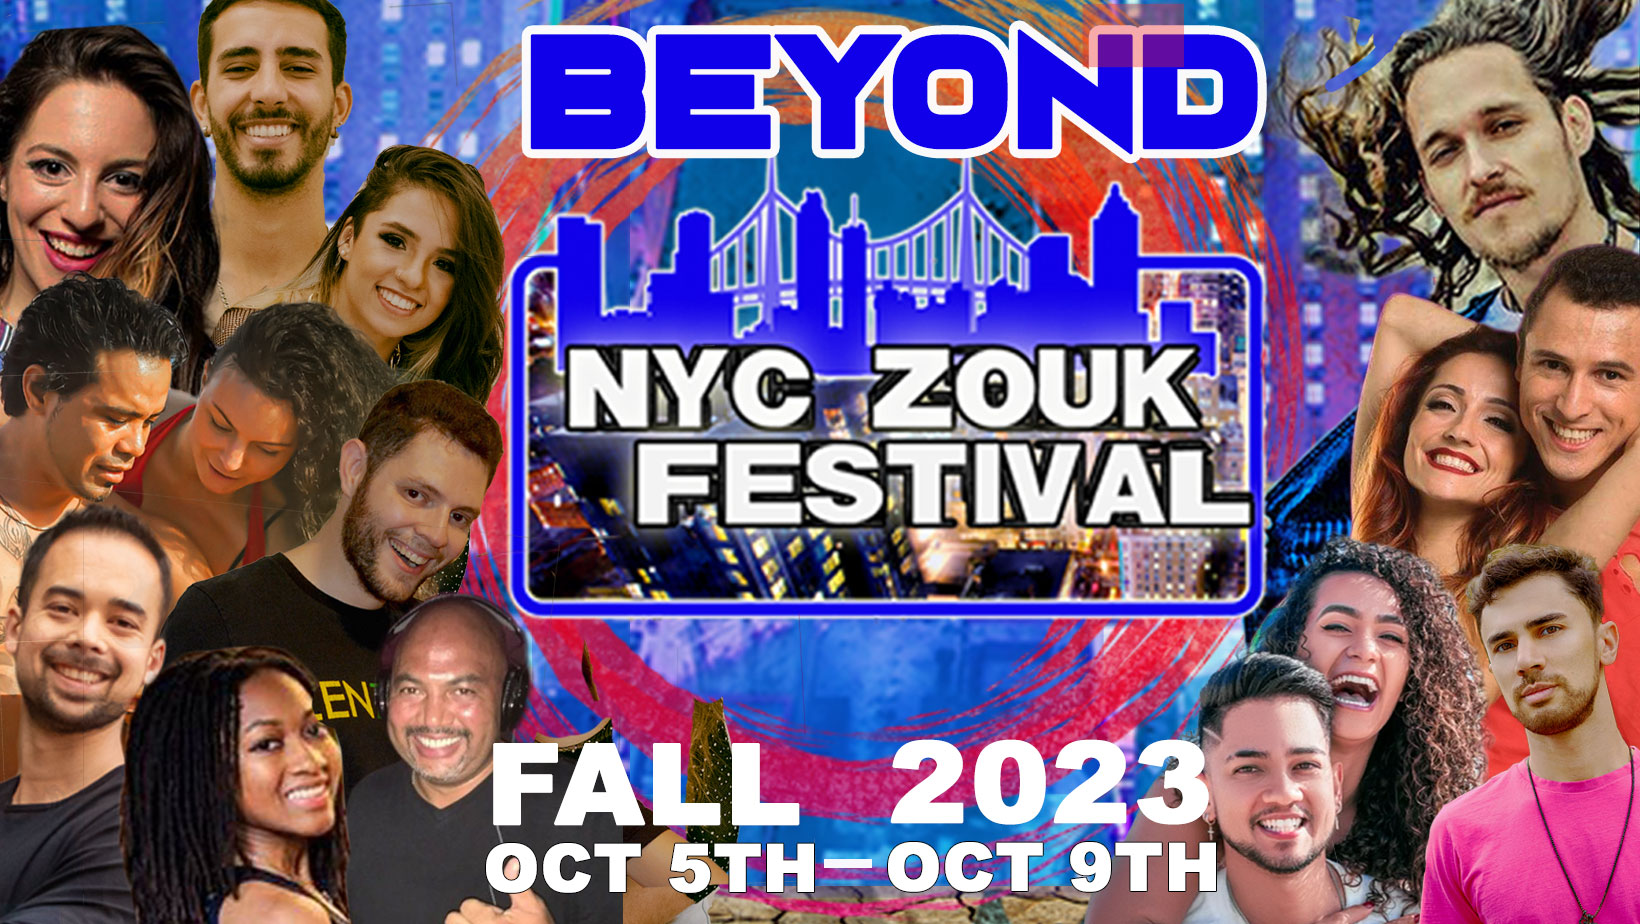 NYC ZOUK FESTIVAL 2023 - BEYOND EDITION OCT 5TH - 9TH  Lets go!